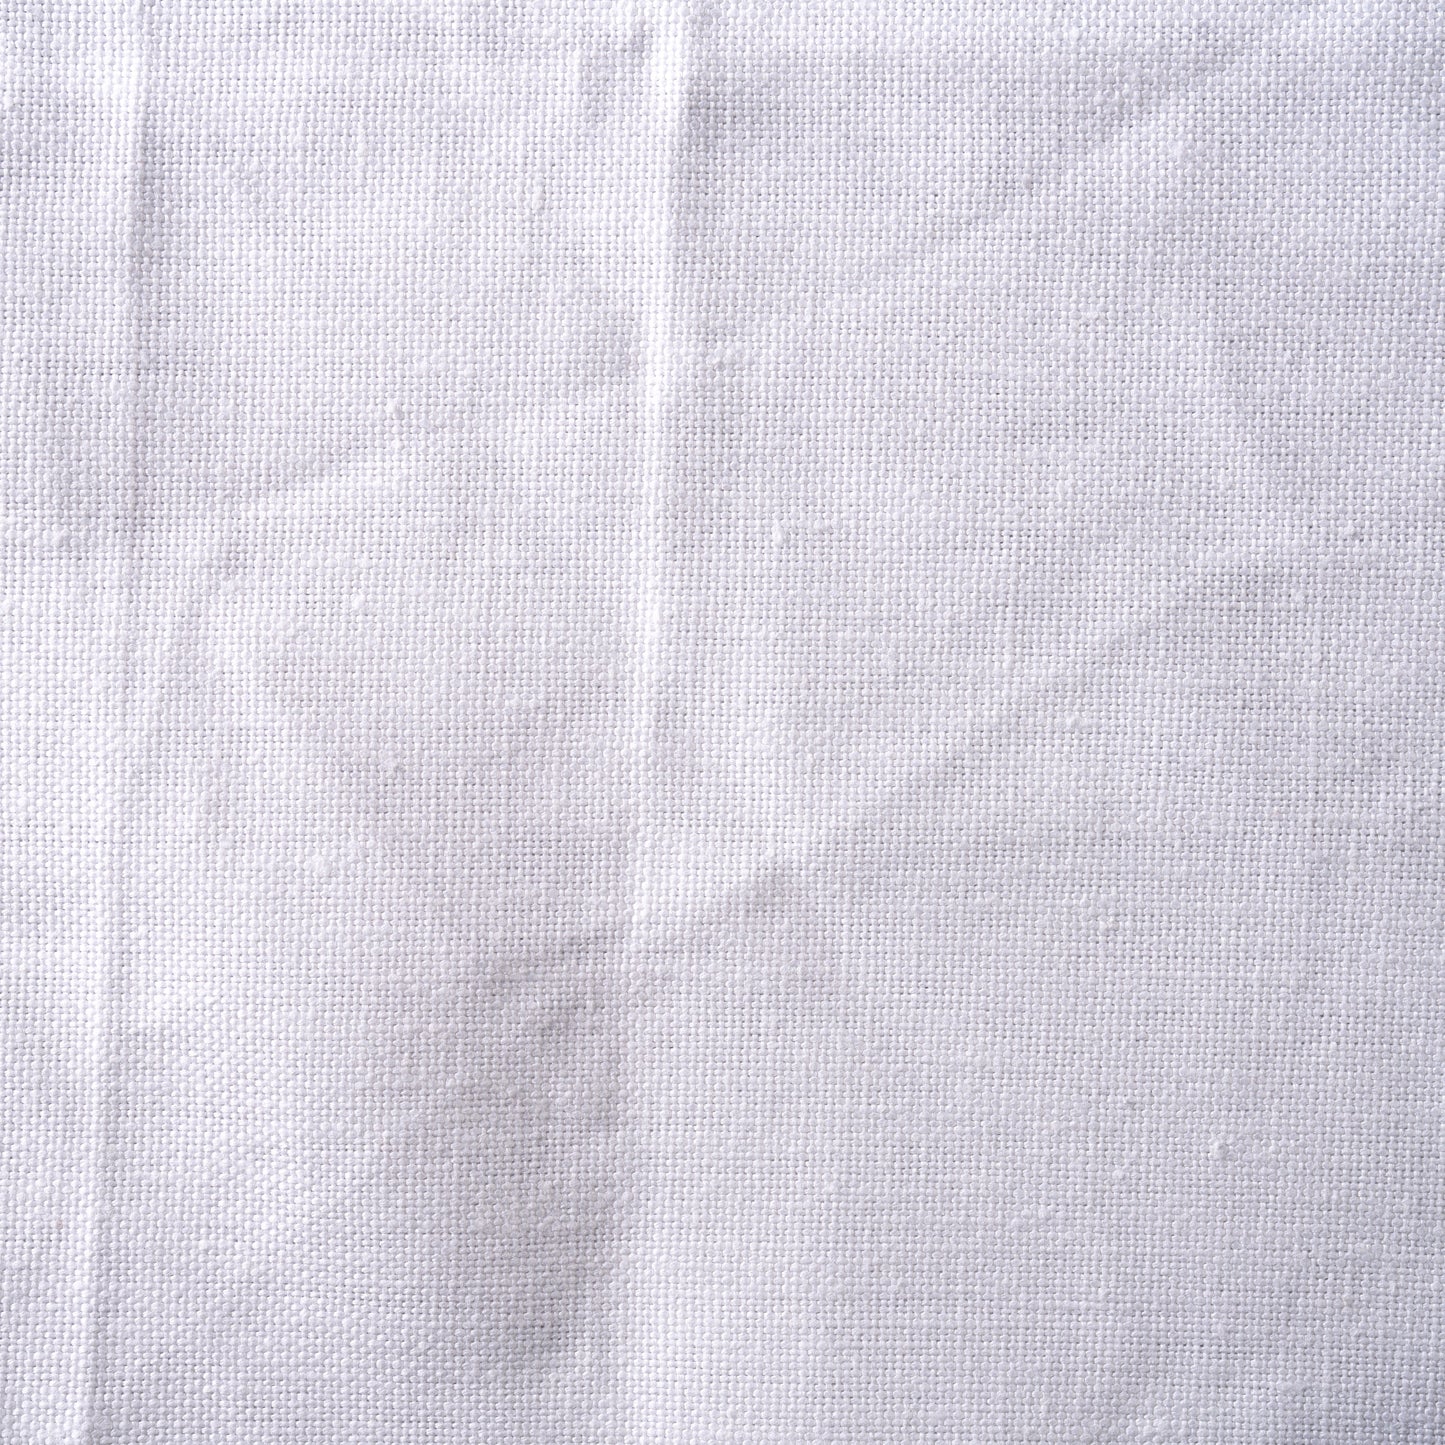 11 oz/sq yard 100% Home Furnishing Weight Linen in White Swatch